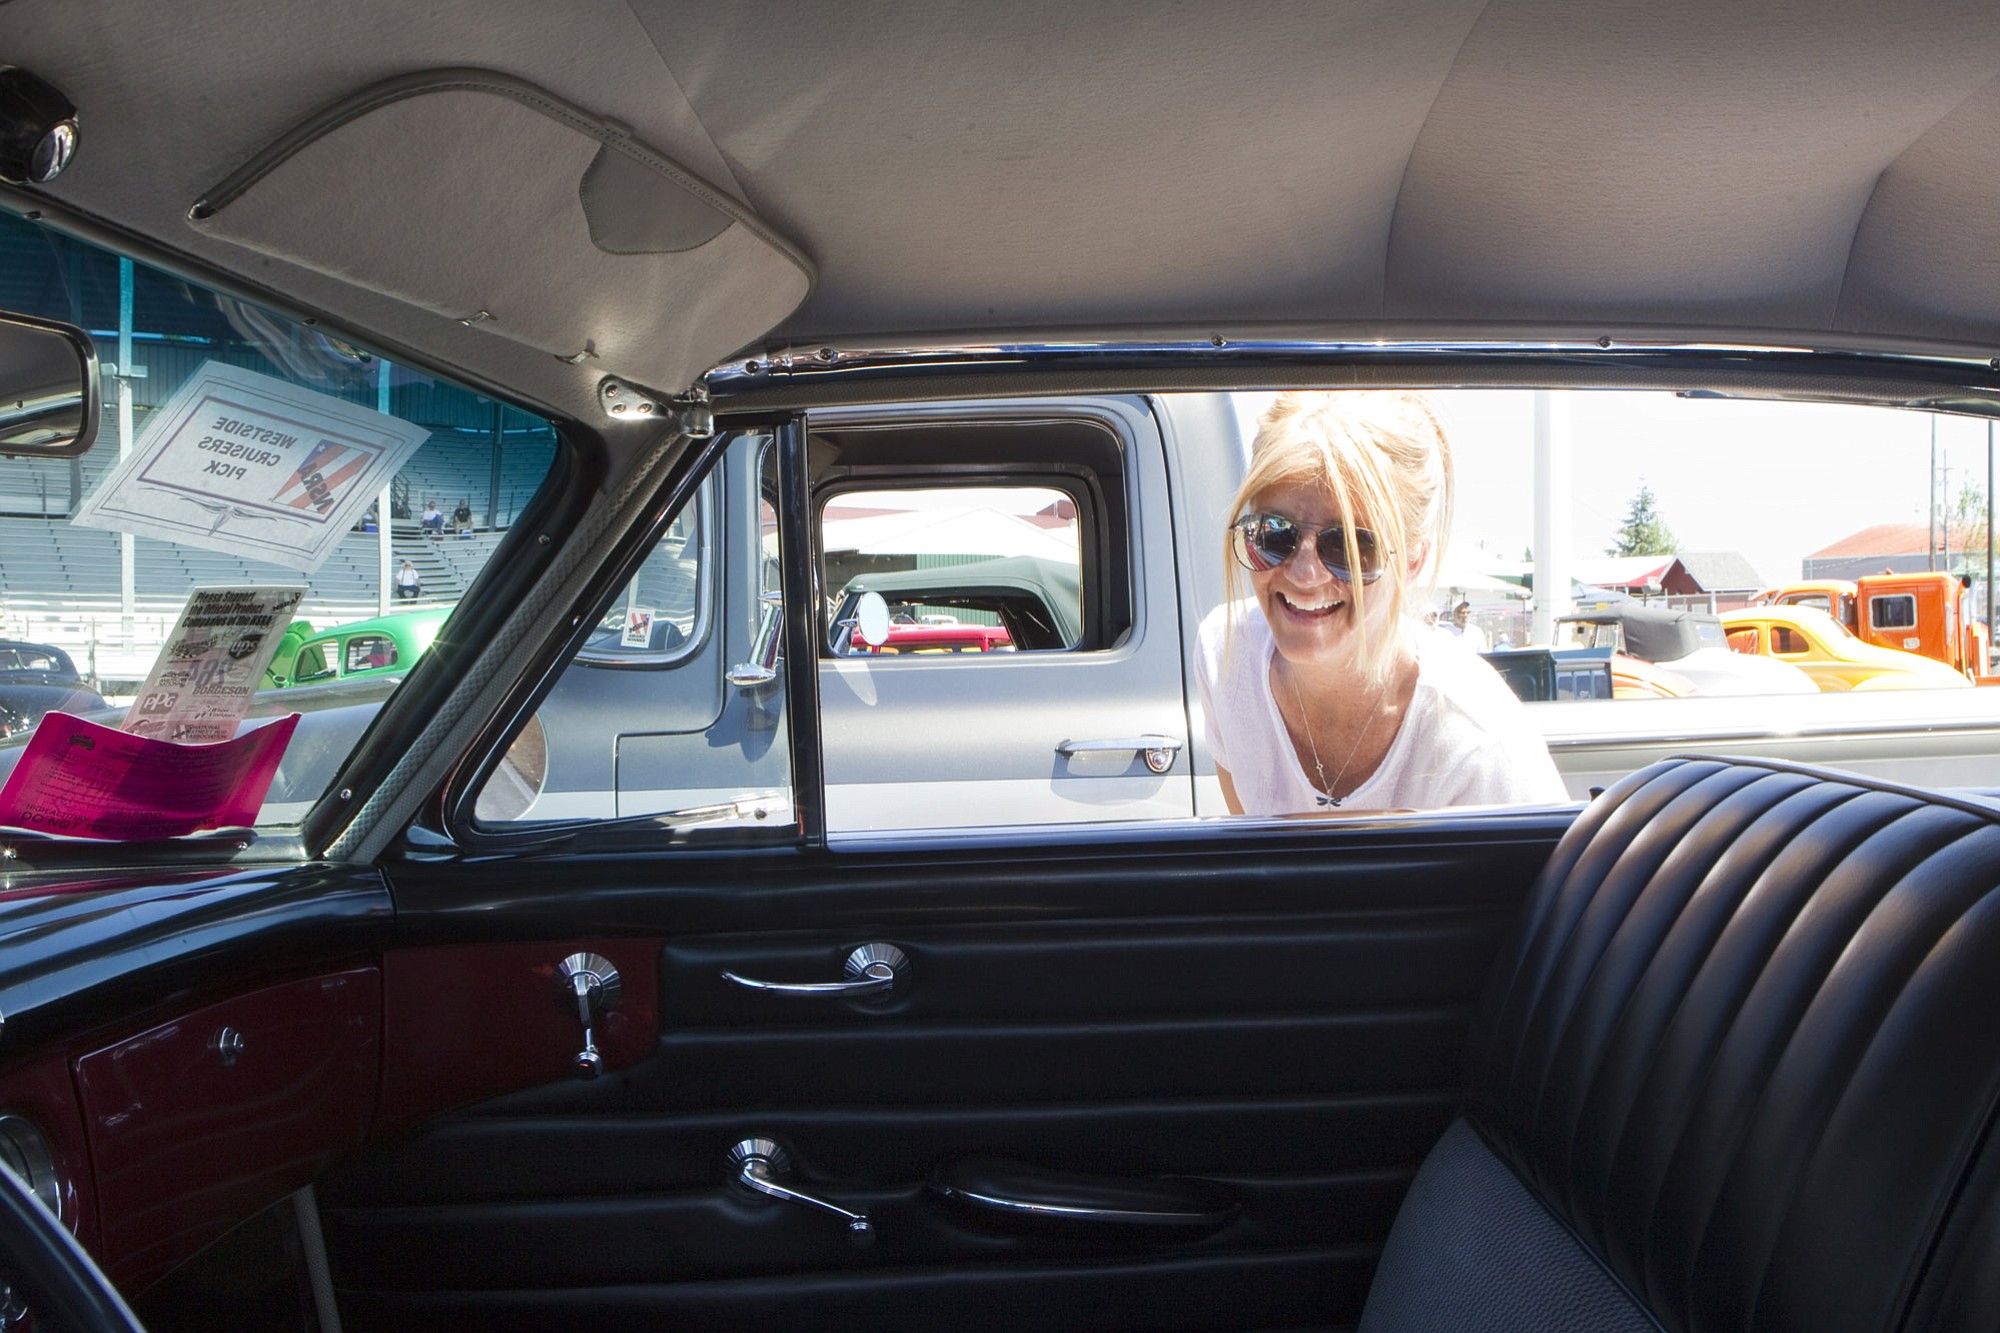 Amy Schlueter peeks inside a refurbished car Sunday at the Northwest Street Rod Nationals Plus Show at the Clark County Event Center at the Fairgrounds.